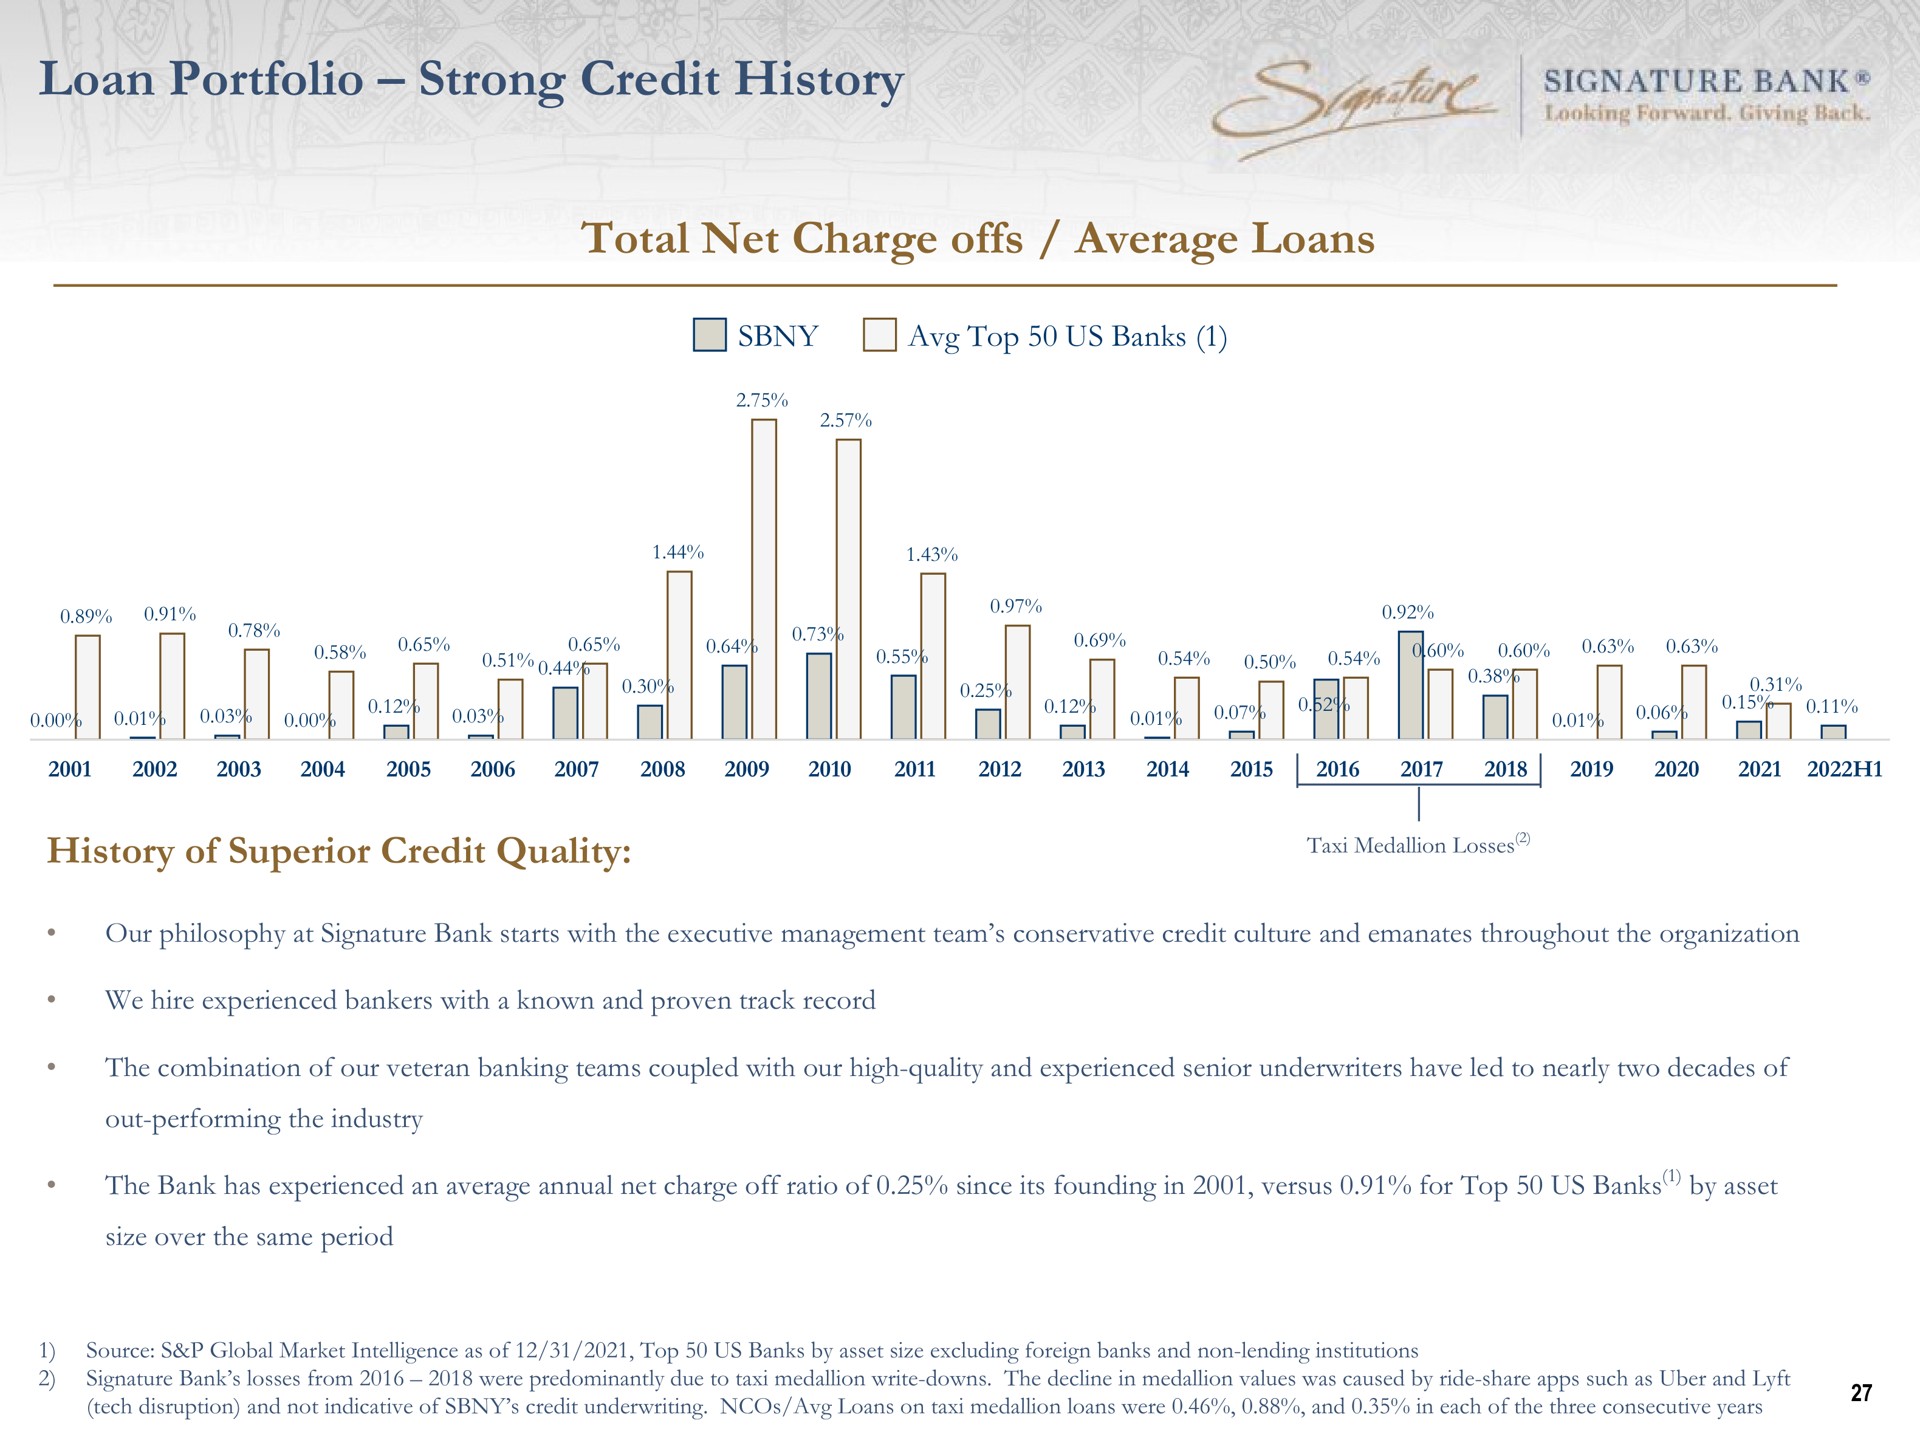 loan portfolio strong credit history total net charge offs average loans signature bank top us banks of superior quality taxi medallion losses | Signature Bank